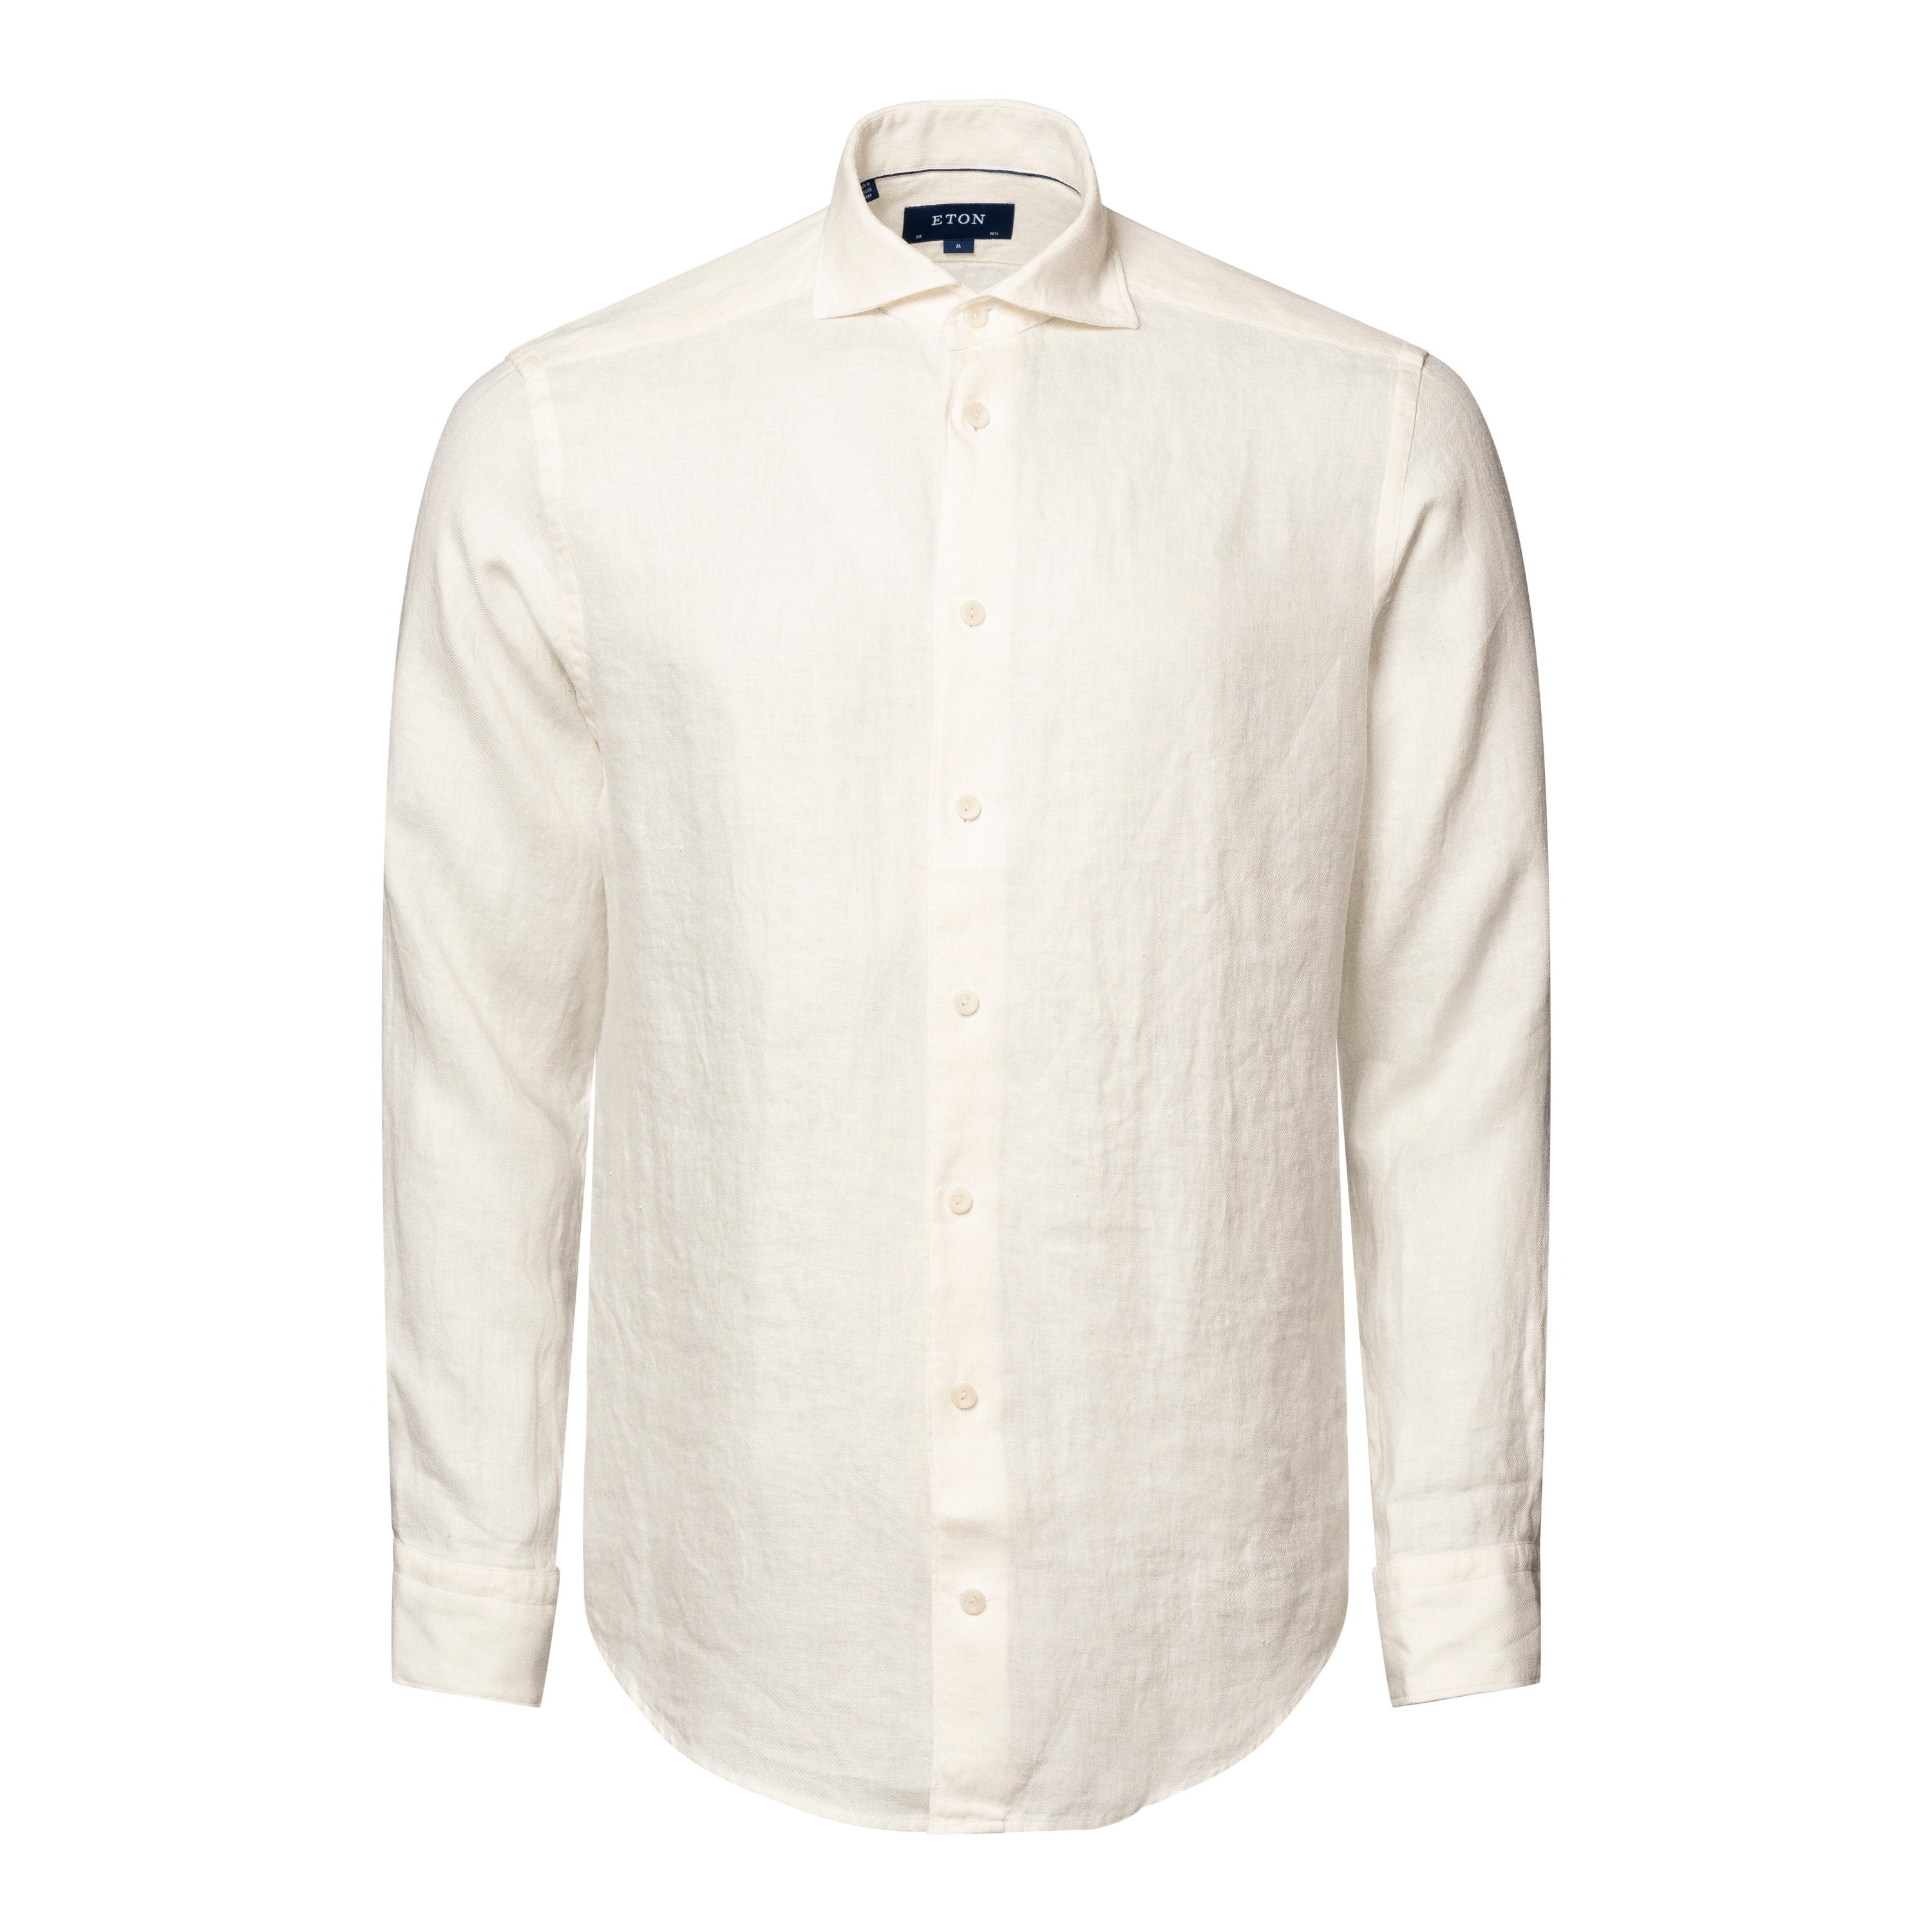 ETON - Off White CONTEMPORARY FIT Linen Twill Shirt 10000470900